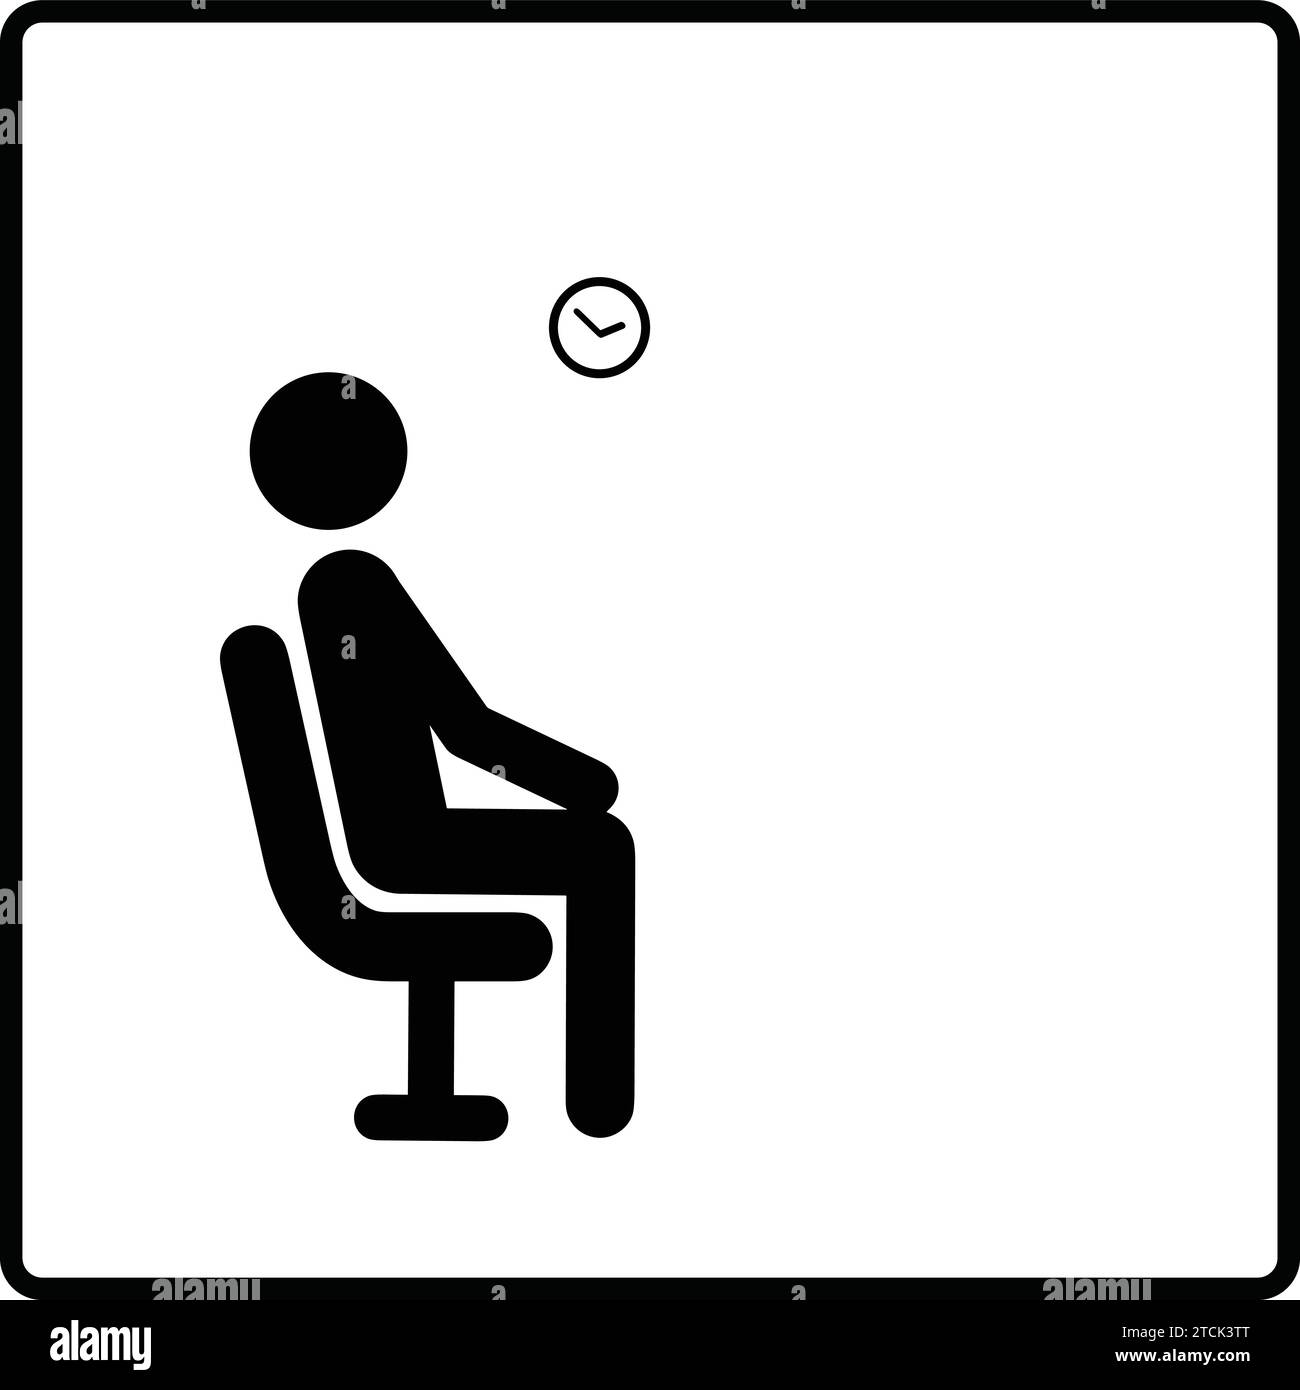 Waiting symbol| Waiting Area sign green color | Waiting room vector | Waiting room Stock Vector